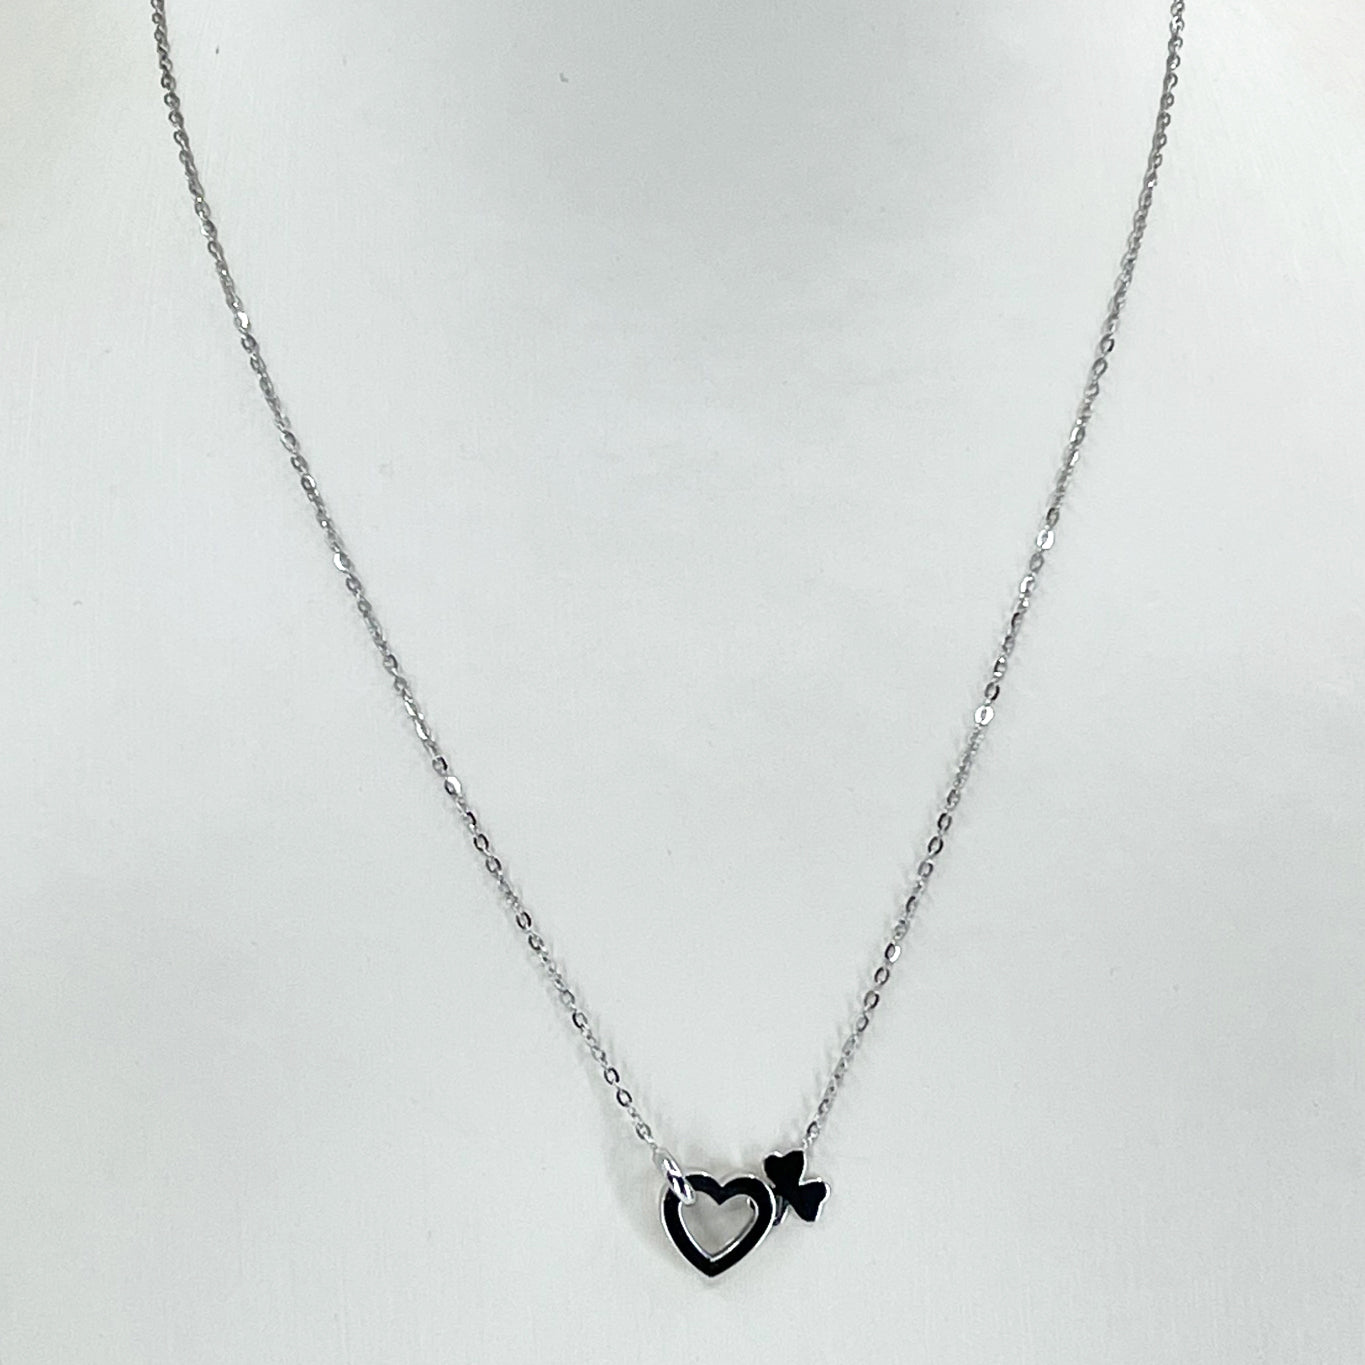 18K Solid White Gold Round Link Chain Necklace with Heart Pendant 16